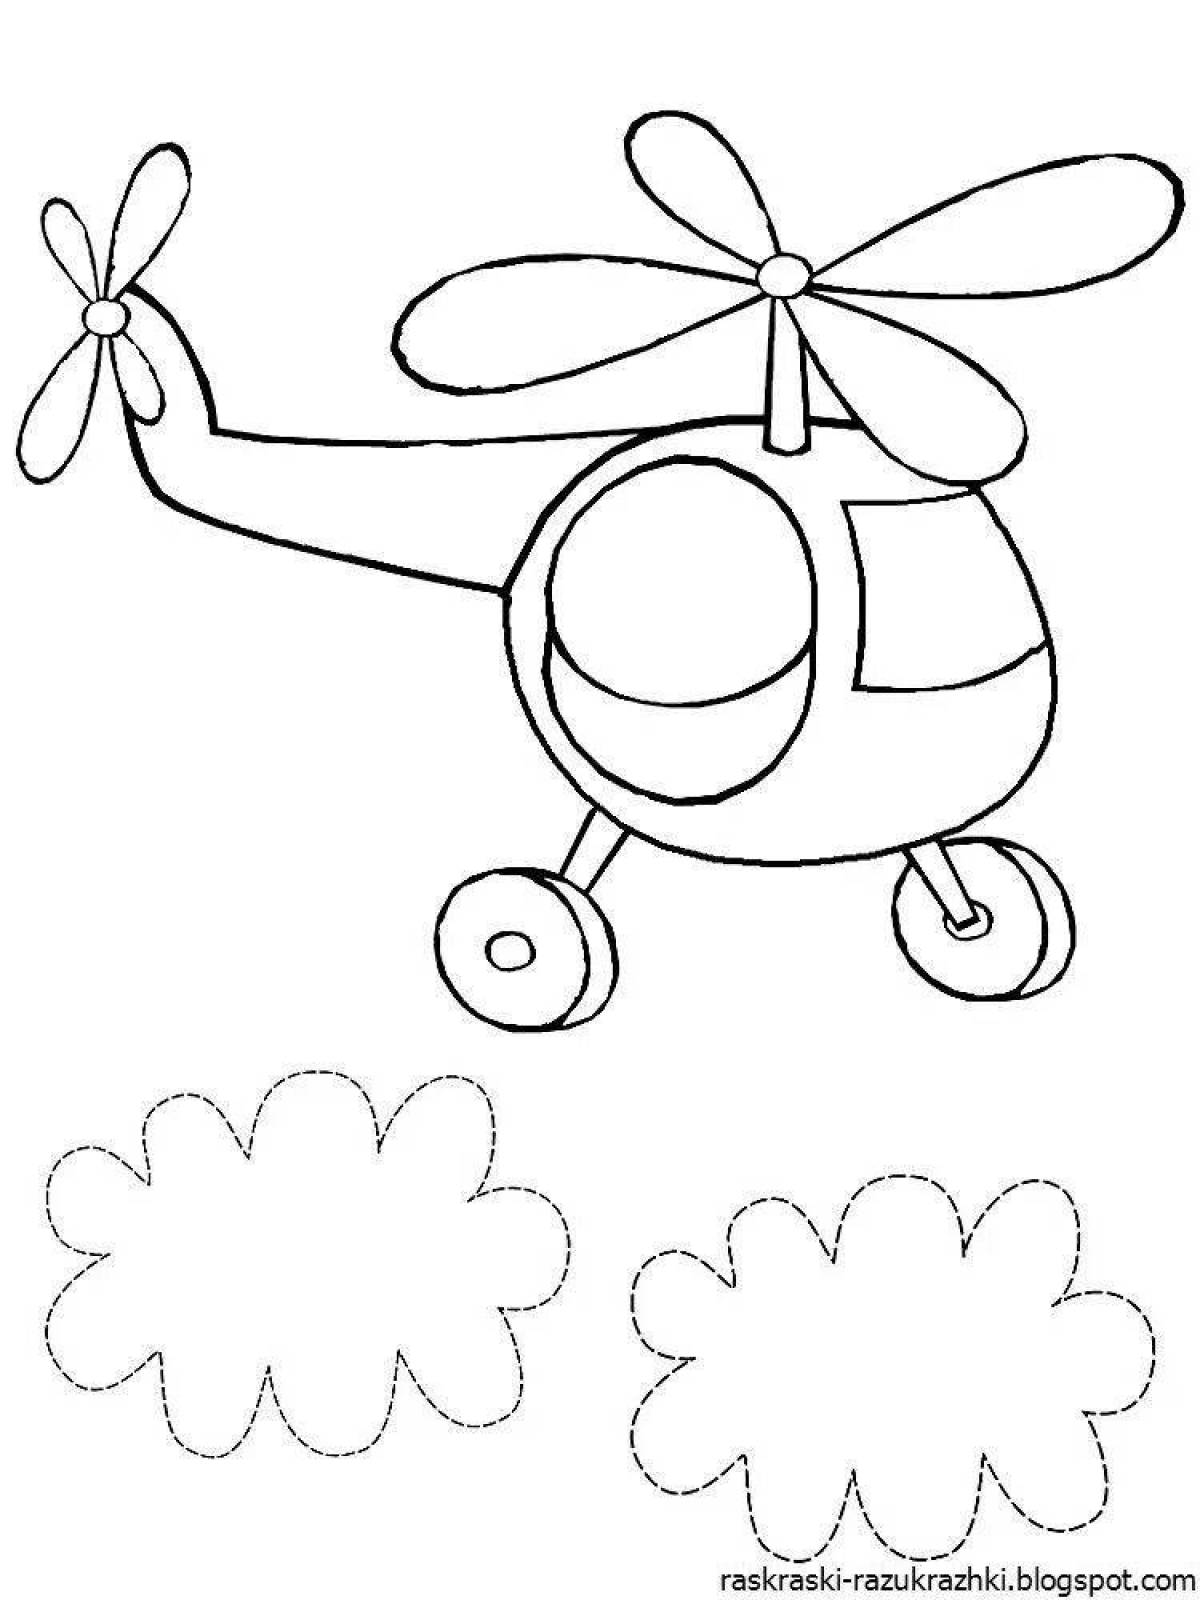 Inspiring helicopter coloring book for kids